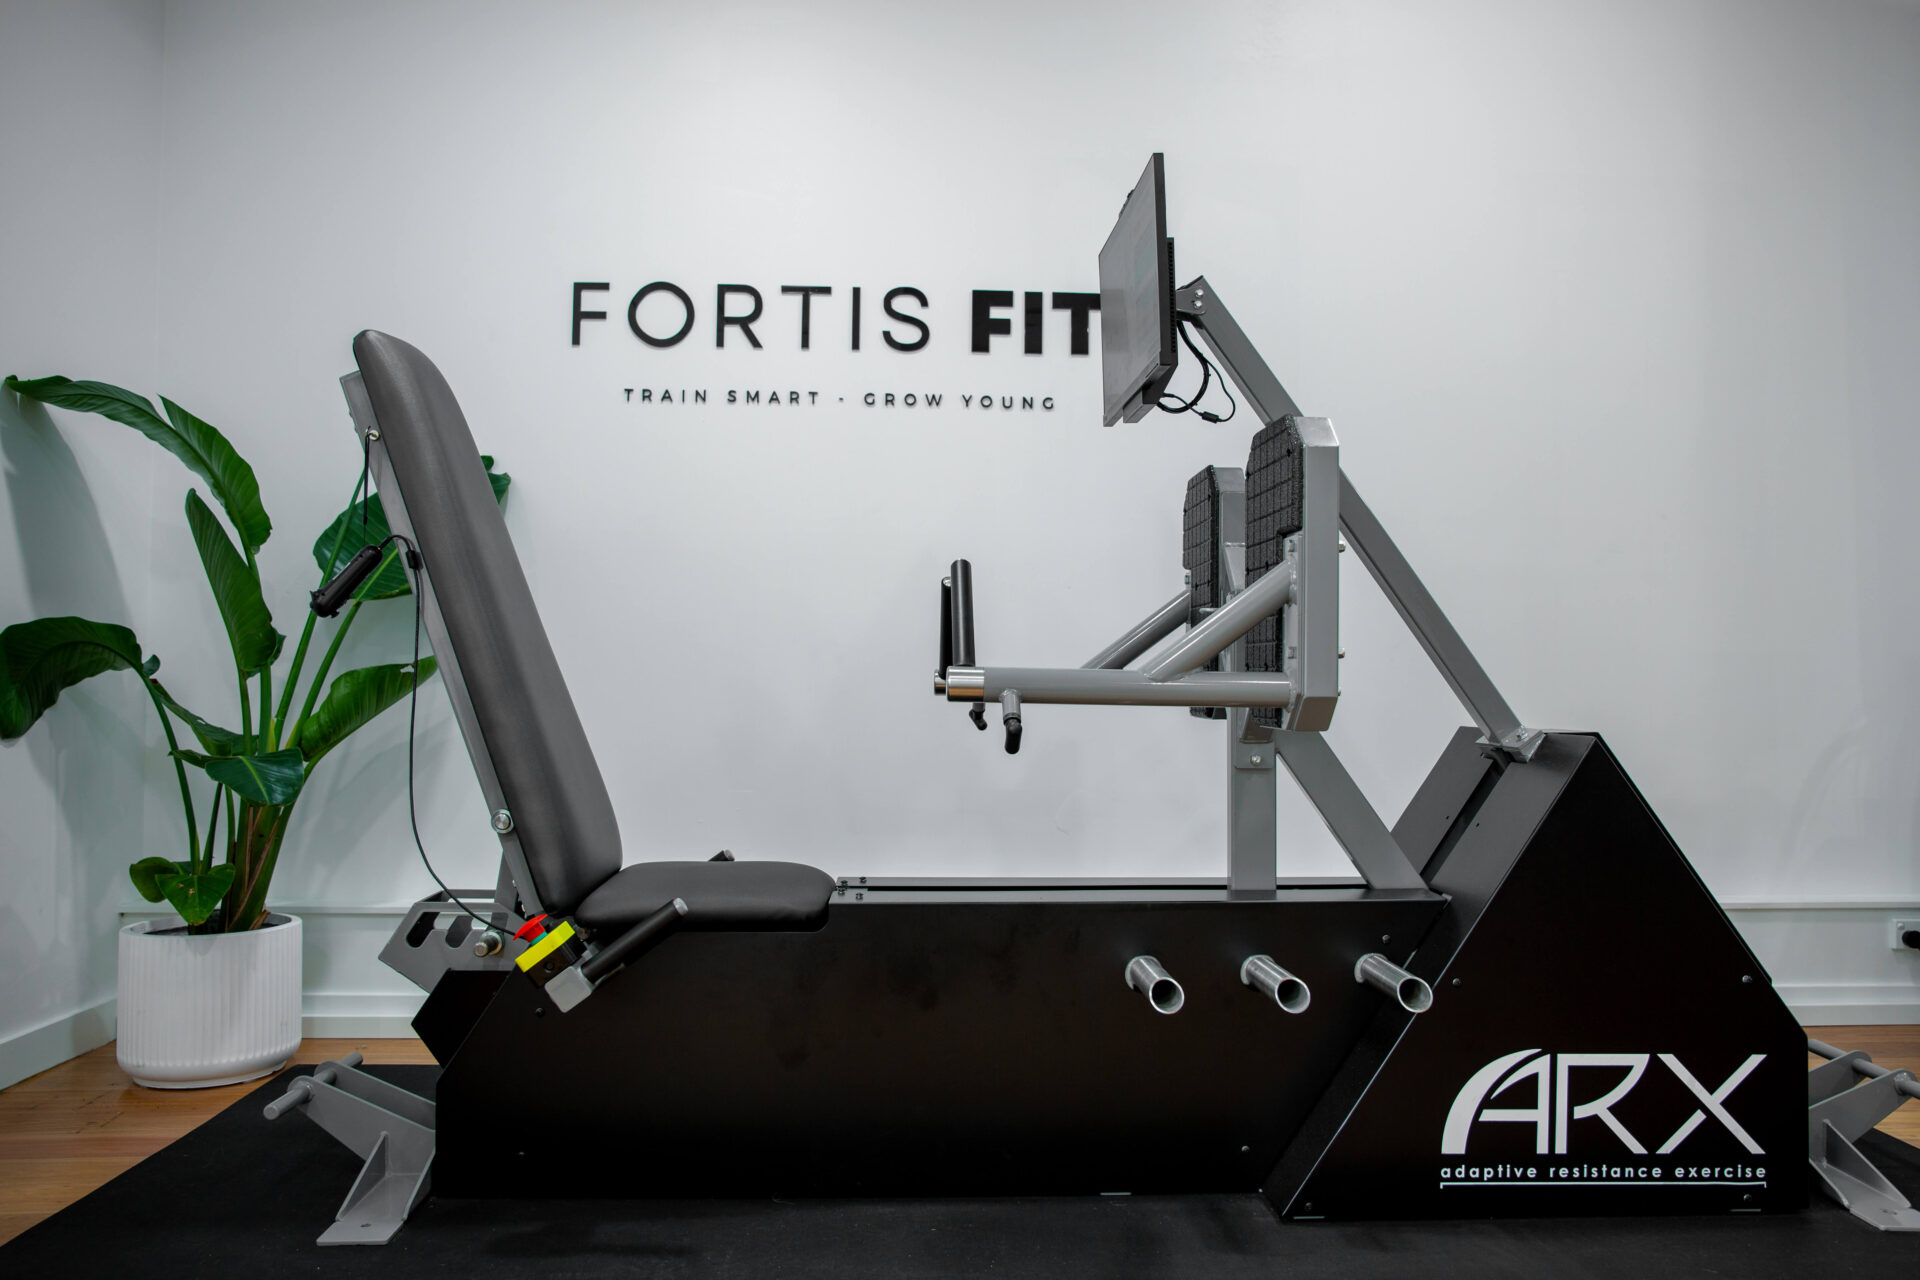 Personal trainer assisting a client with using the ARX adaptive resistance machine at Fortis Fit Personal Training in Sydney.